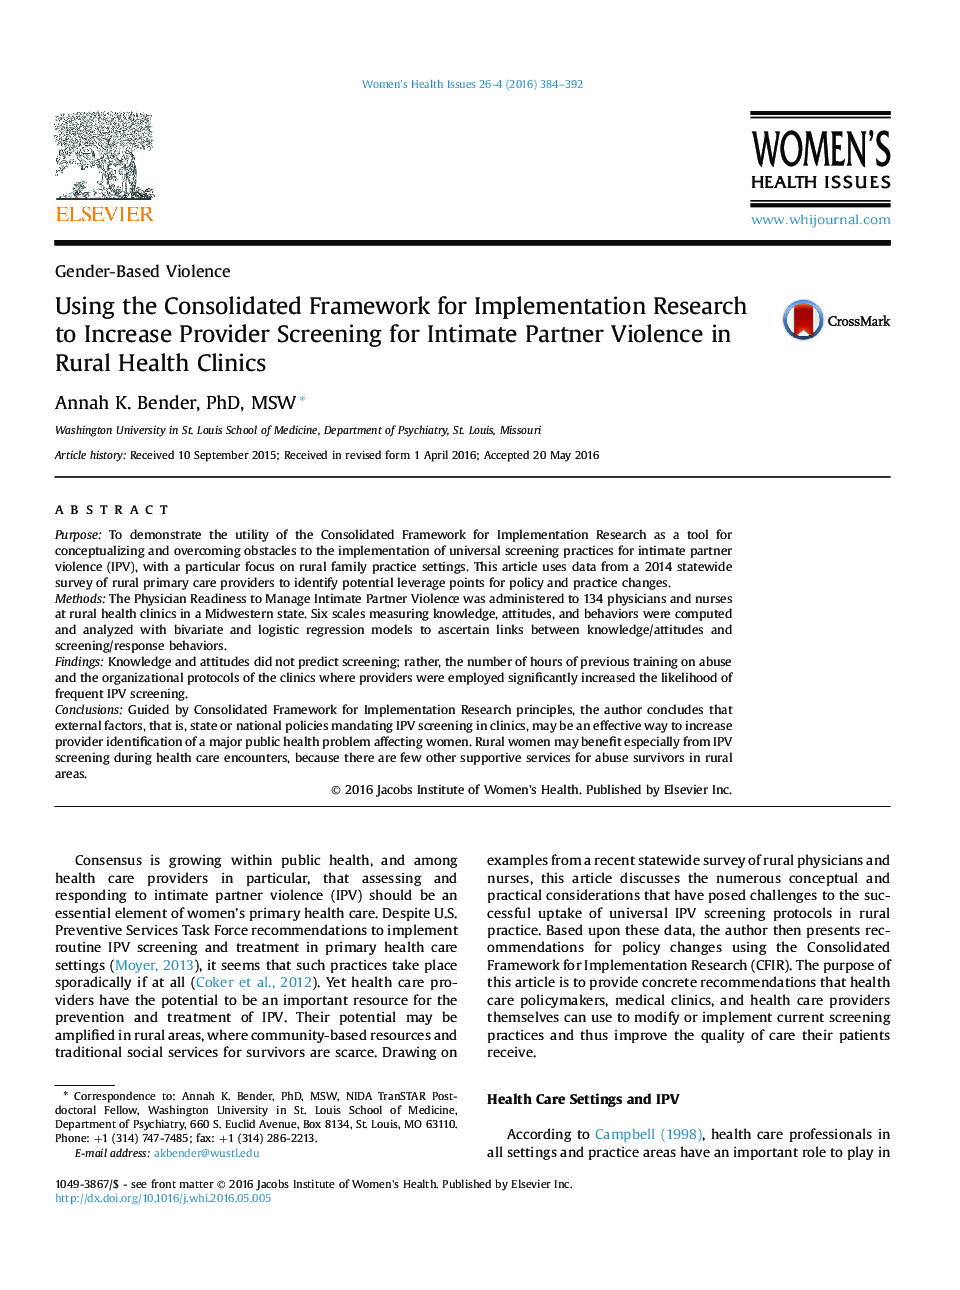 Using the Consolidated Framework for Implementation Research to Increase Provider Screening for Intimate Partner Violence in Rural Health Clinics